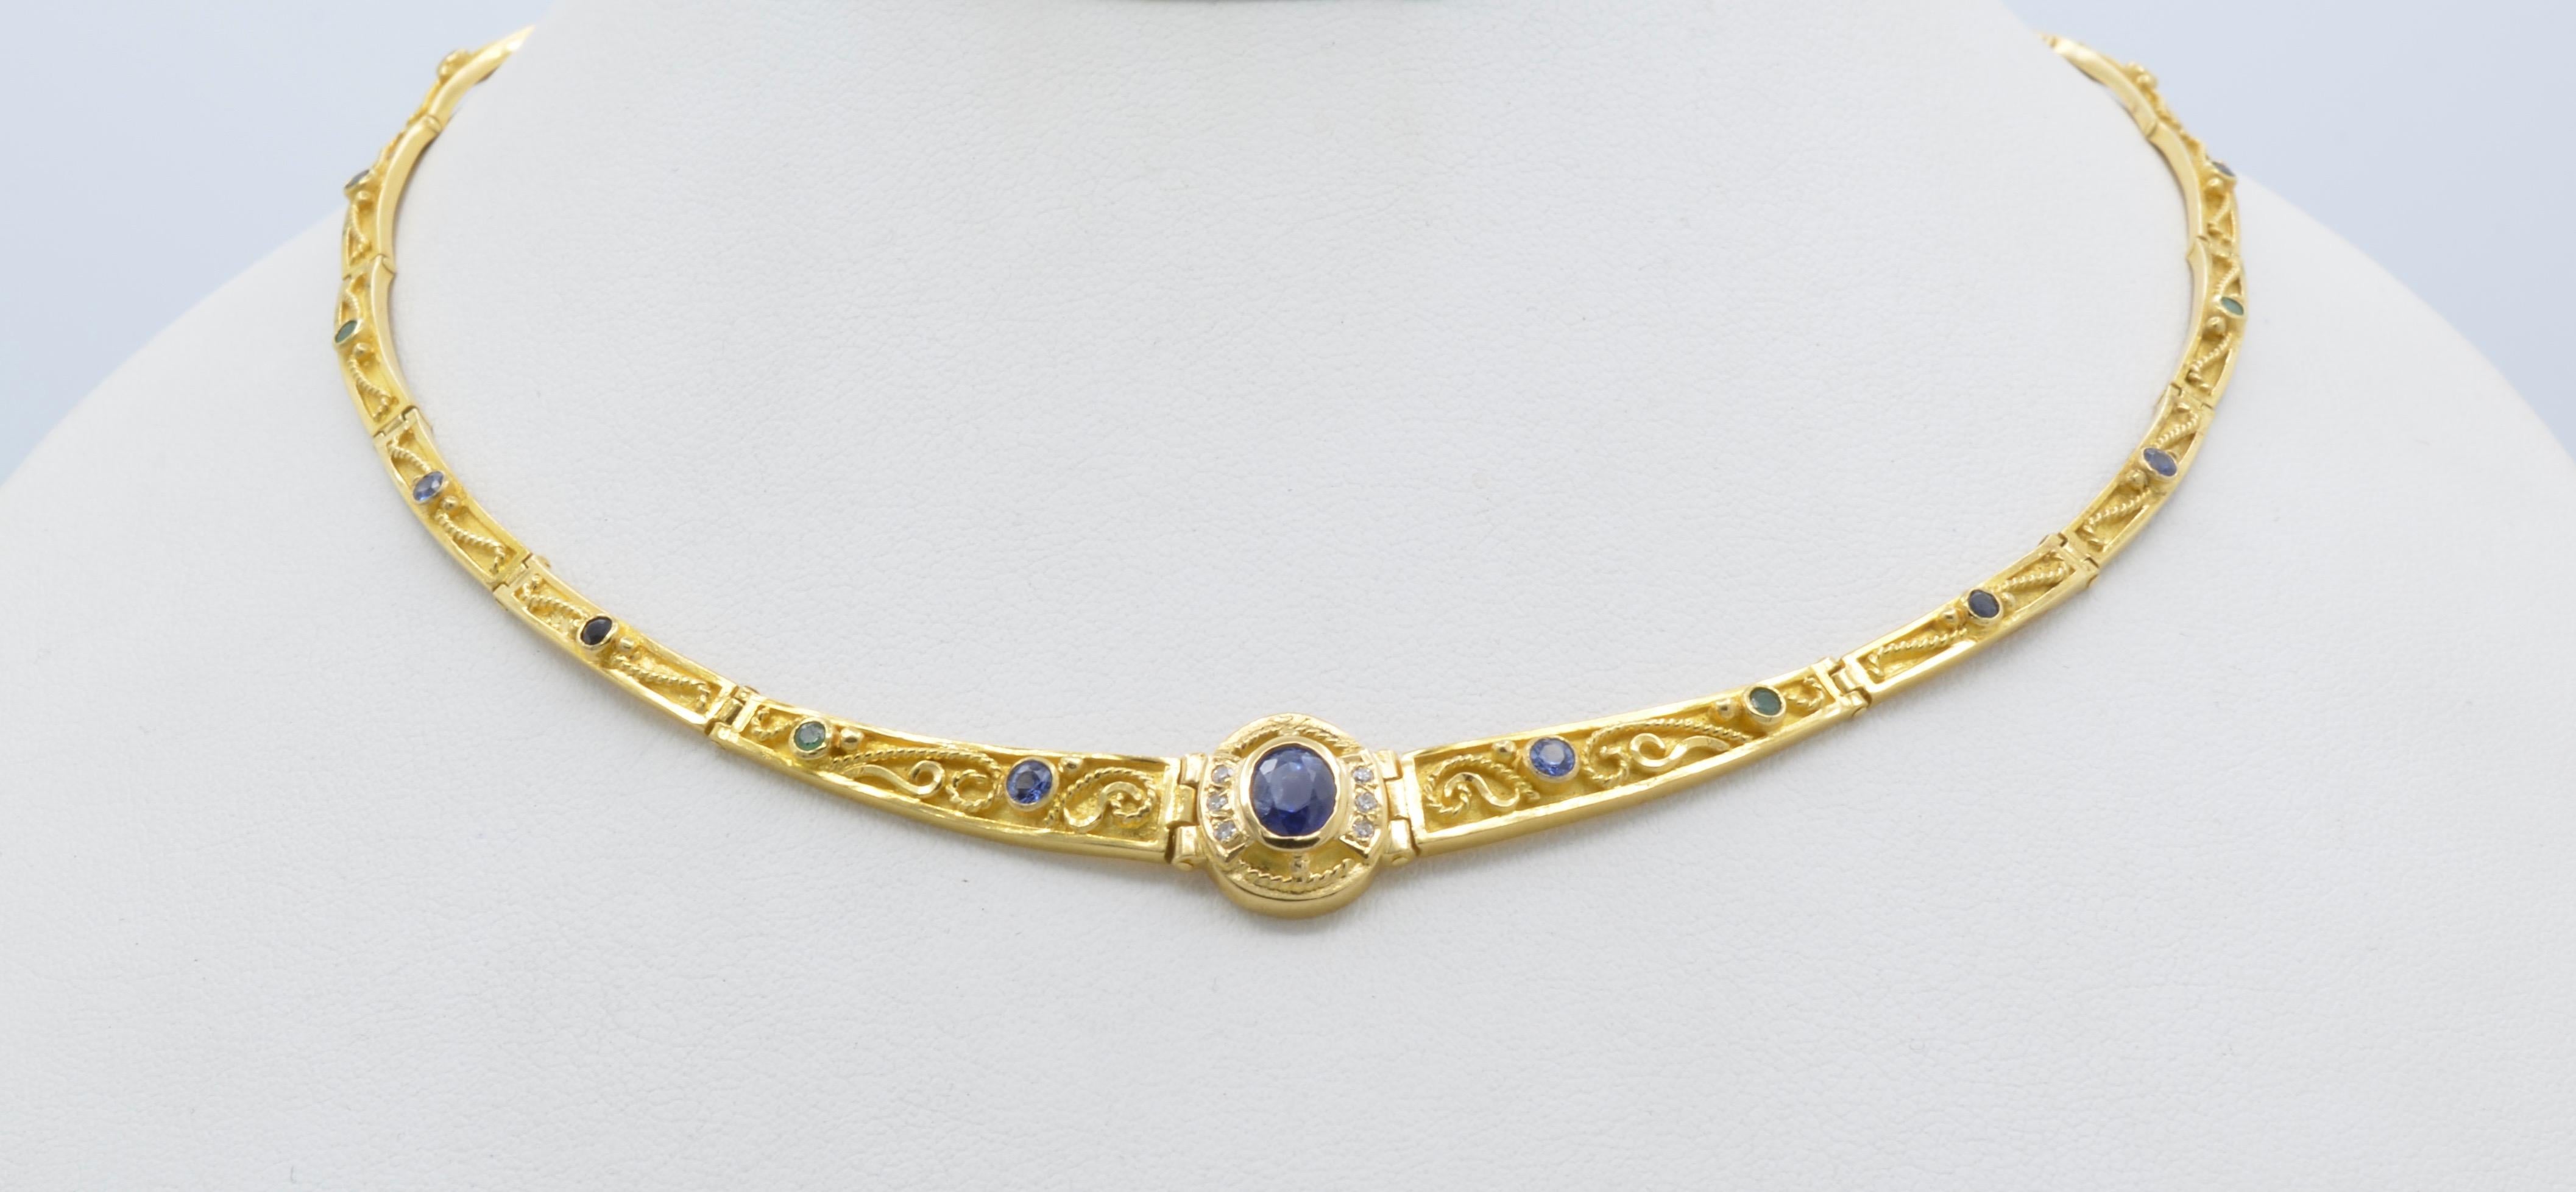 This Grecian 18K yellow gold and 1.1 carat blue sapphire chain link necklace elegantly lays around the neck in a perfect fashion. Round like a tiara the curved links rest and have more visibility to show off their intricate detail of bright colored